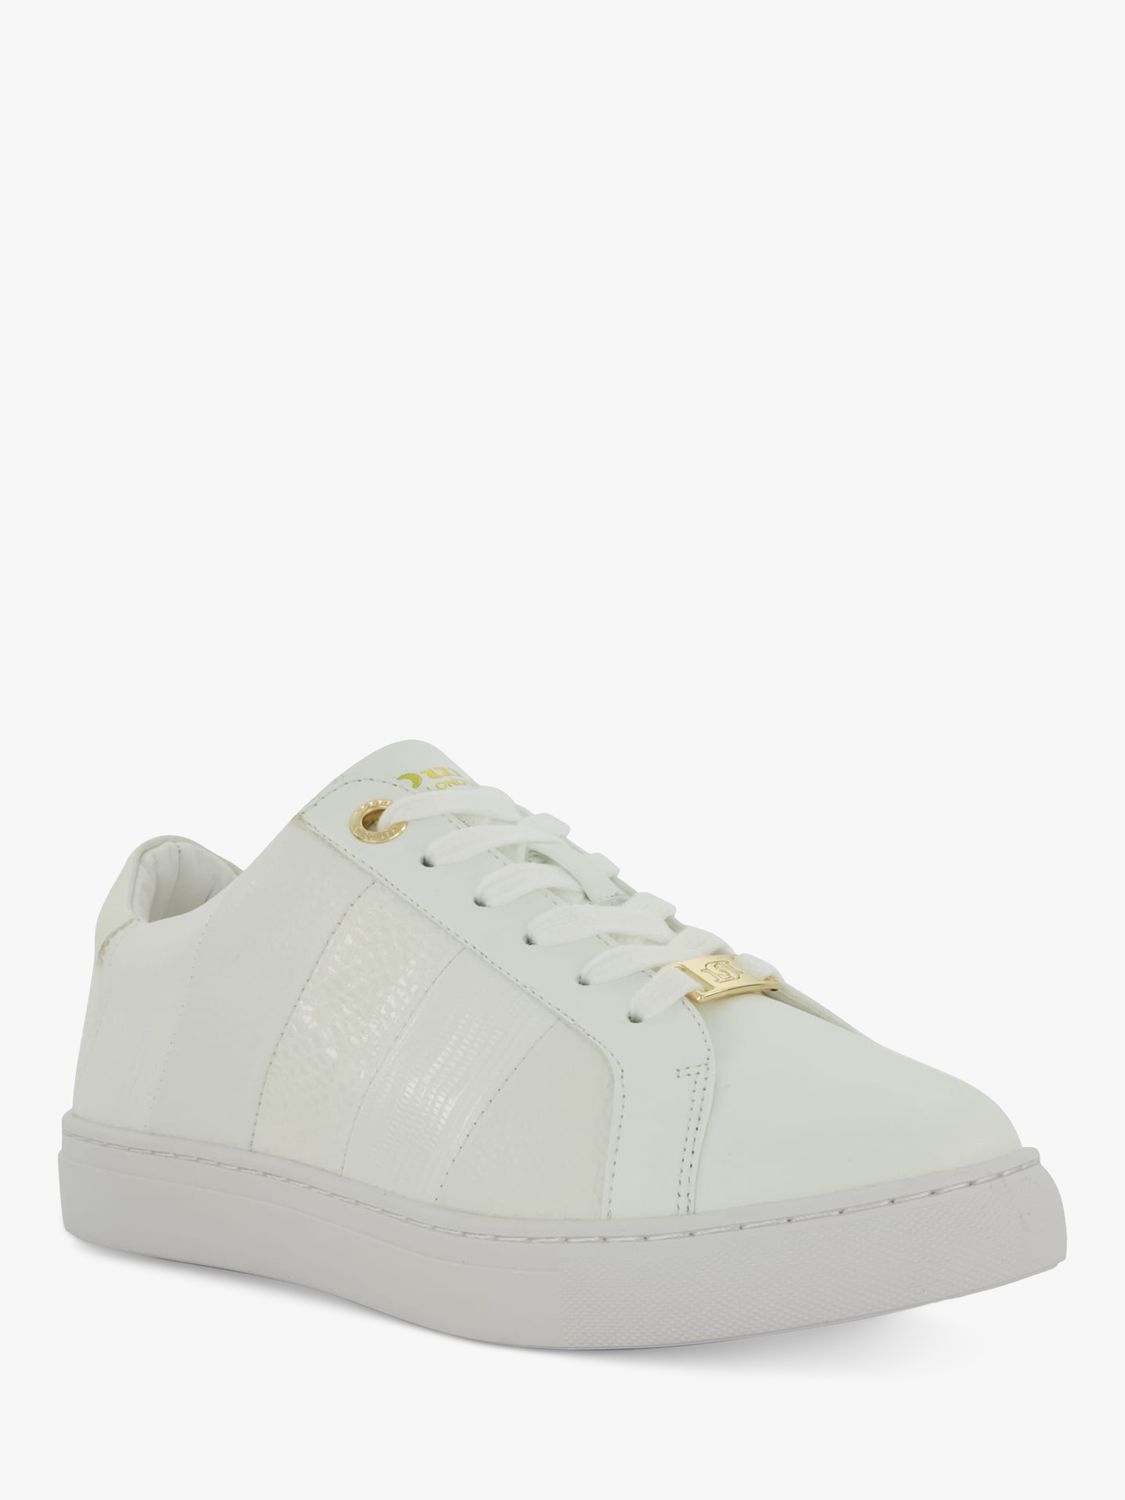 Buy Dune Wide Fit Everleigh Trainers, White Online at johnlewis.com